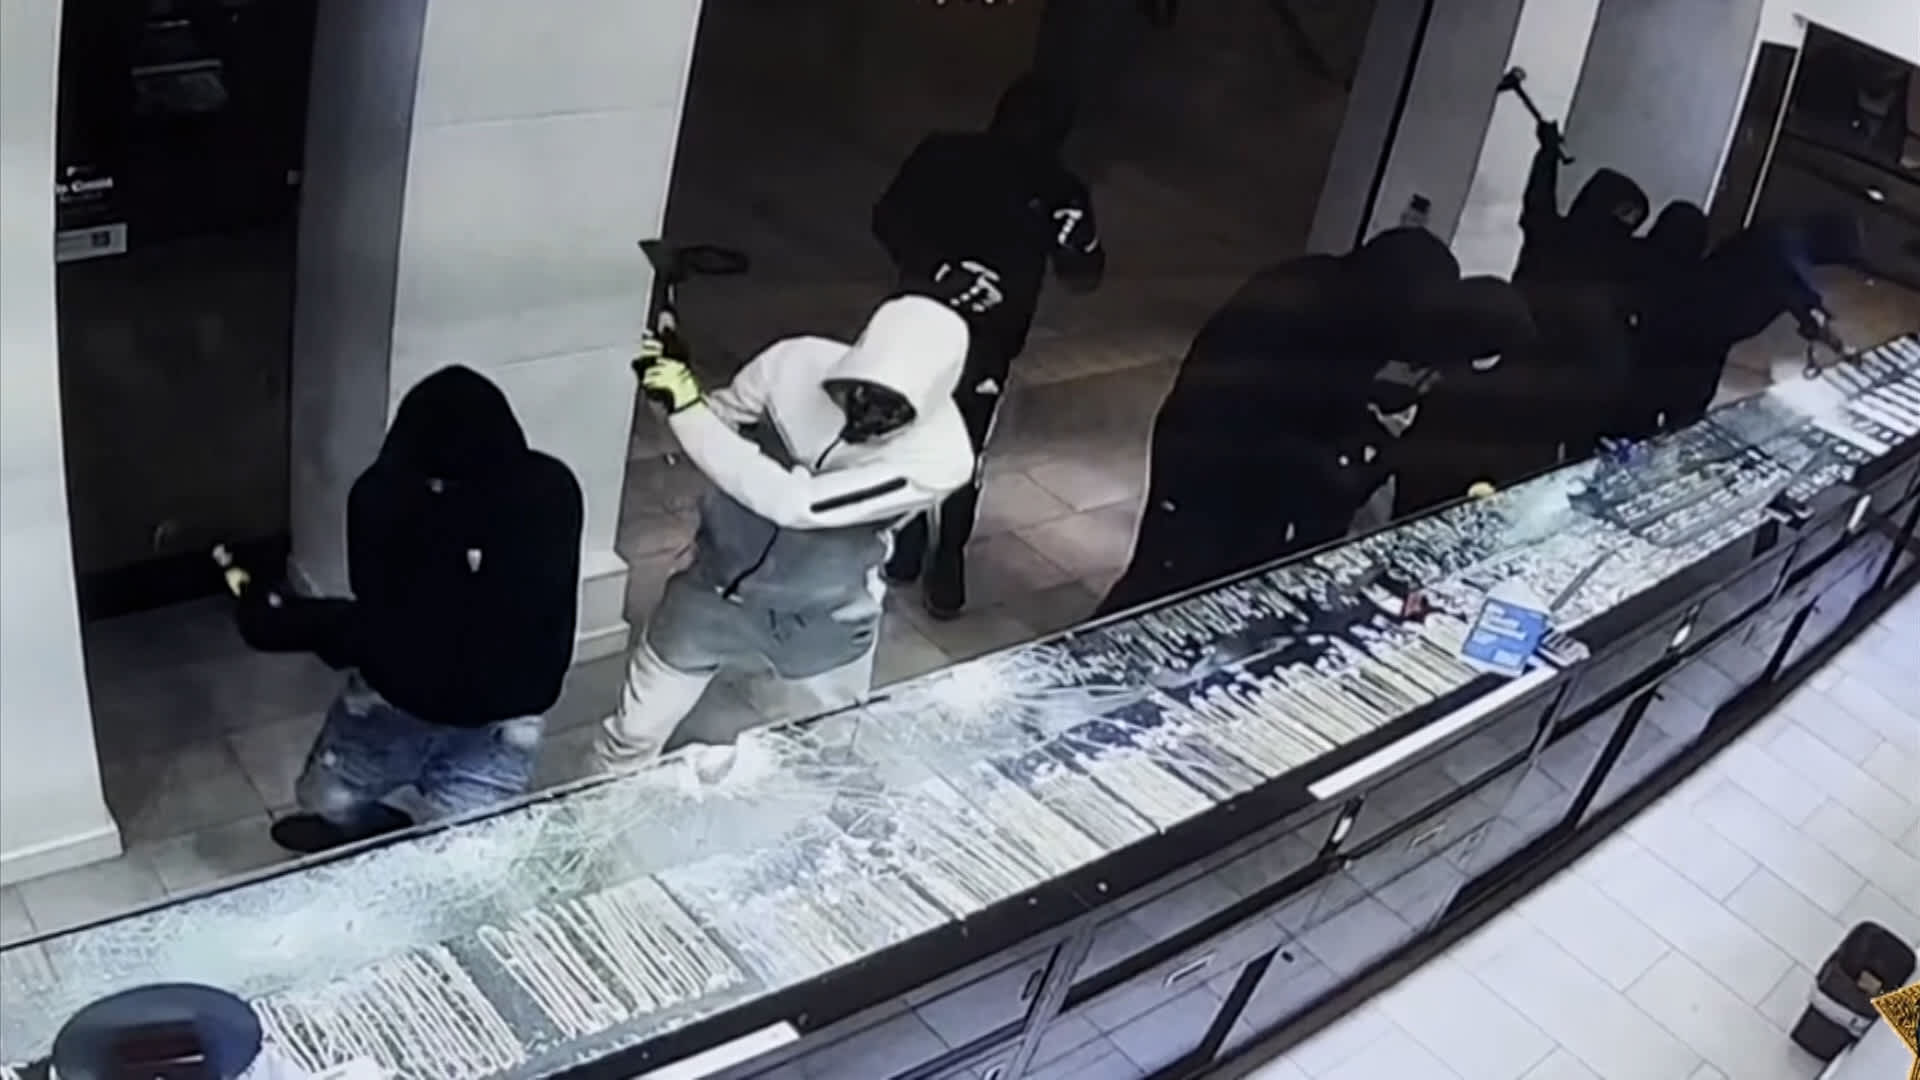 Thieves Steal Items From Louis Vuitton Store in SF's Union Square – NBC Bay  Area